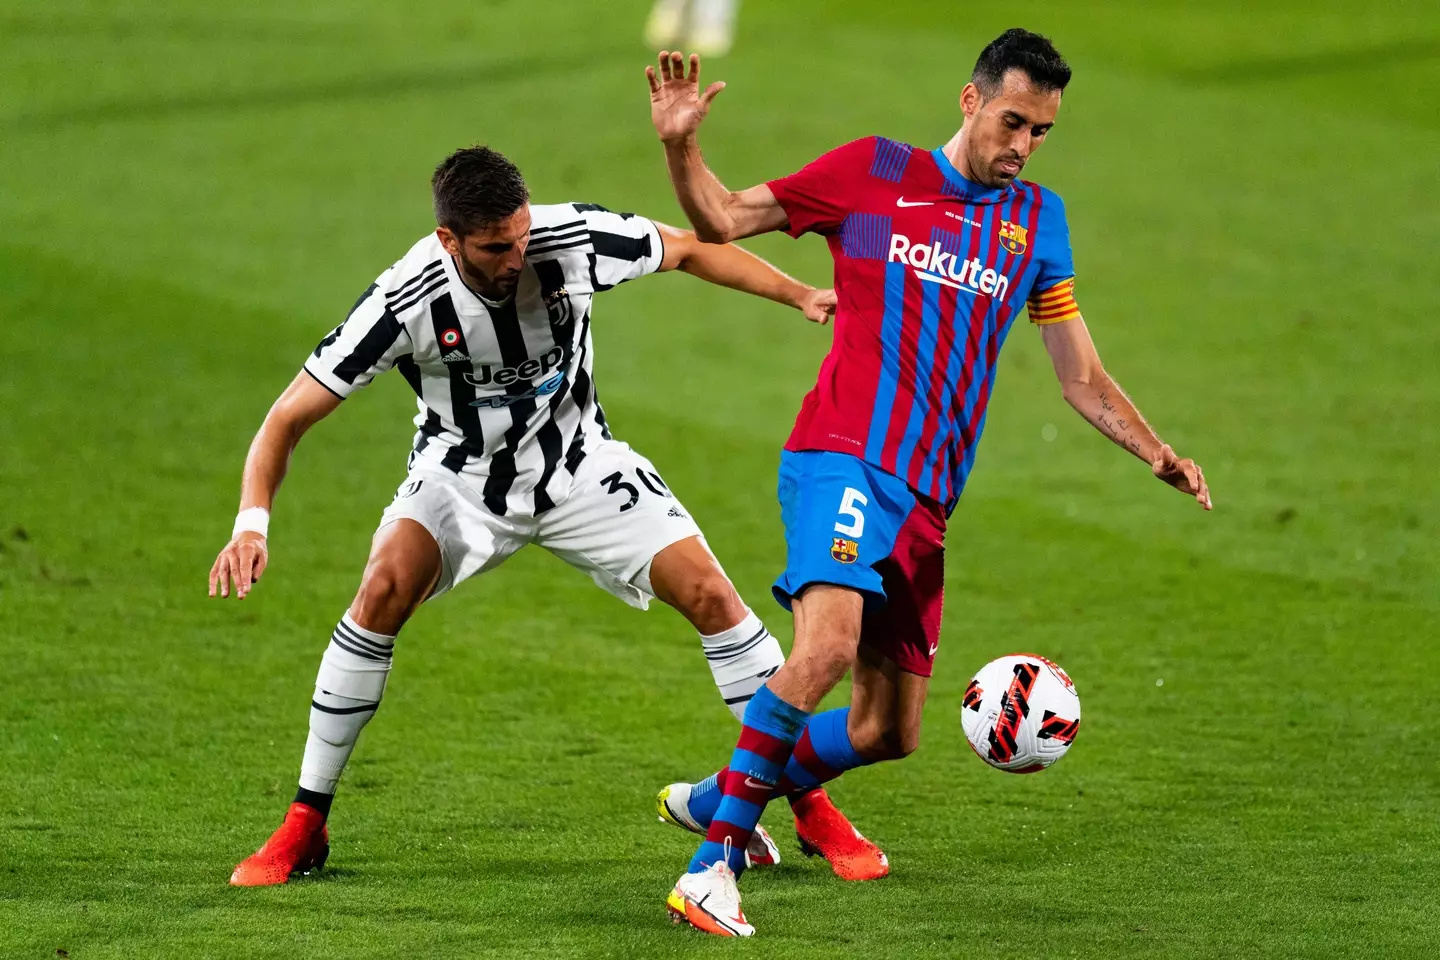 Barcelona beat Juventus to win the Joan Gamper Trophy last year (Image: Alamy)